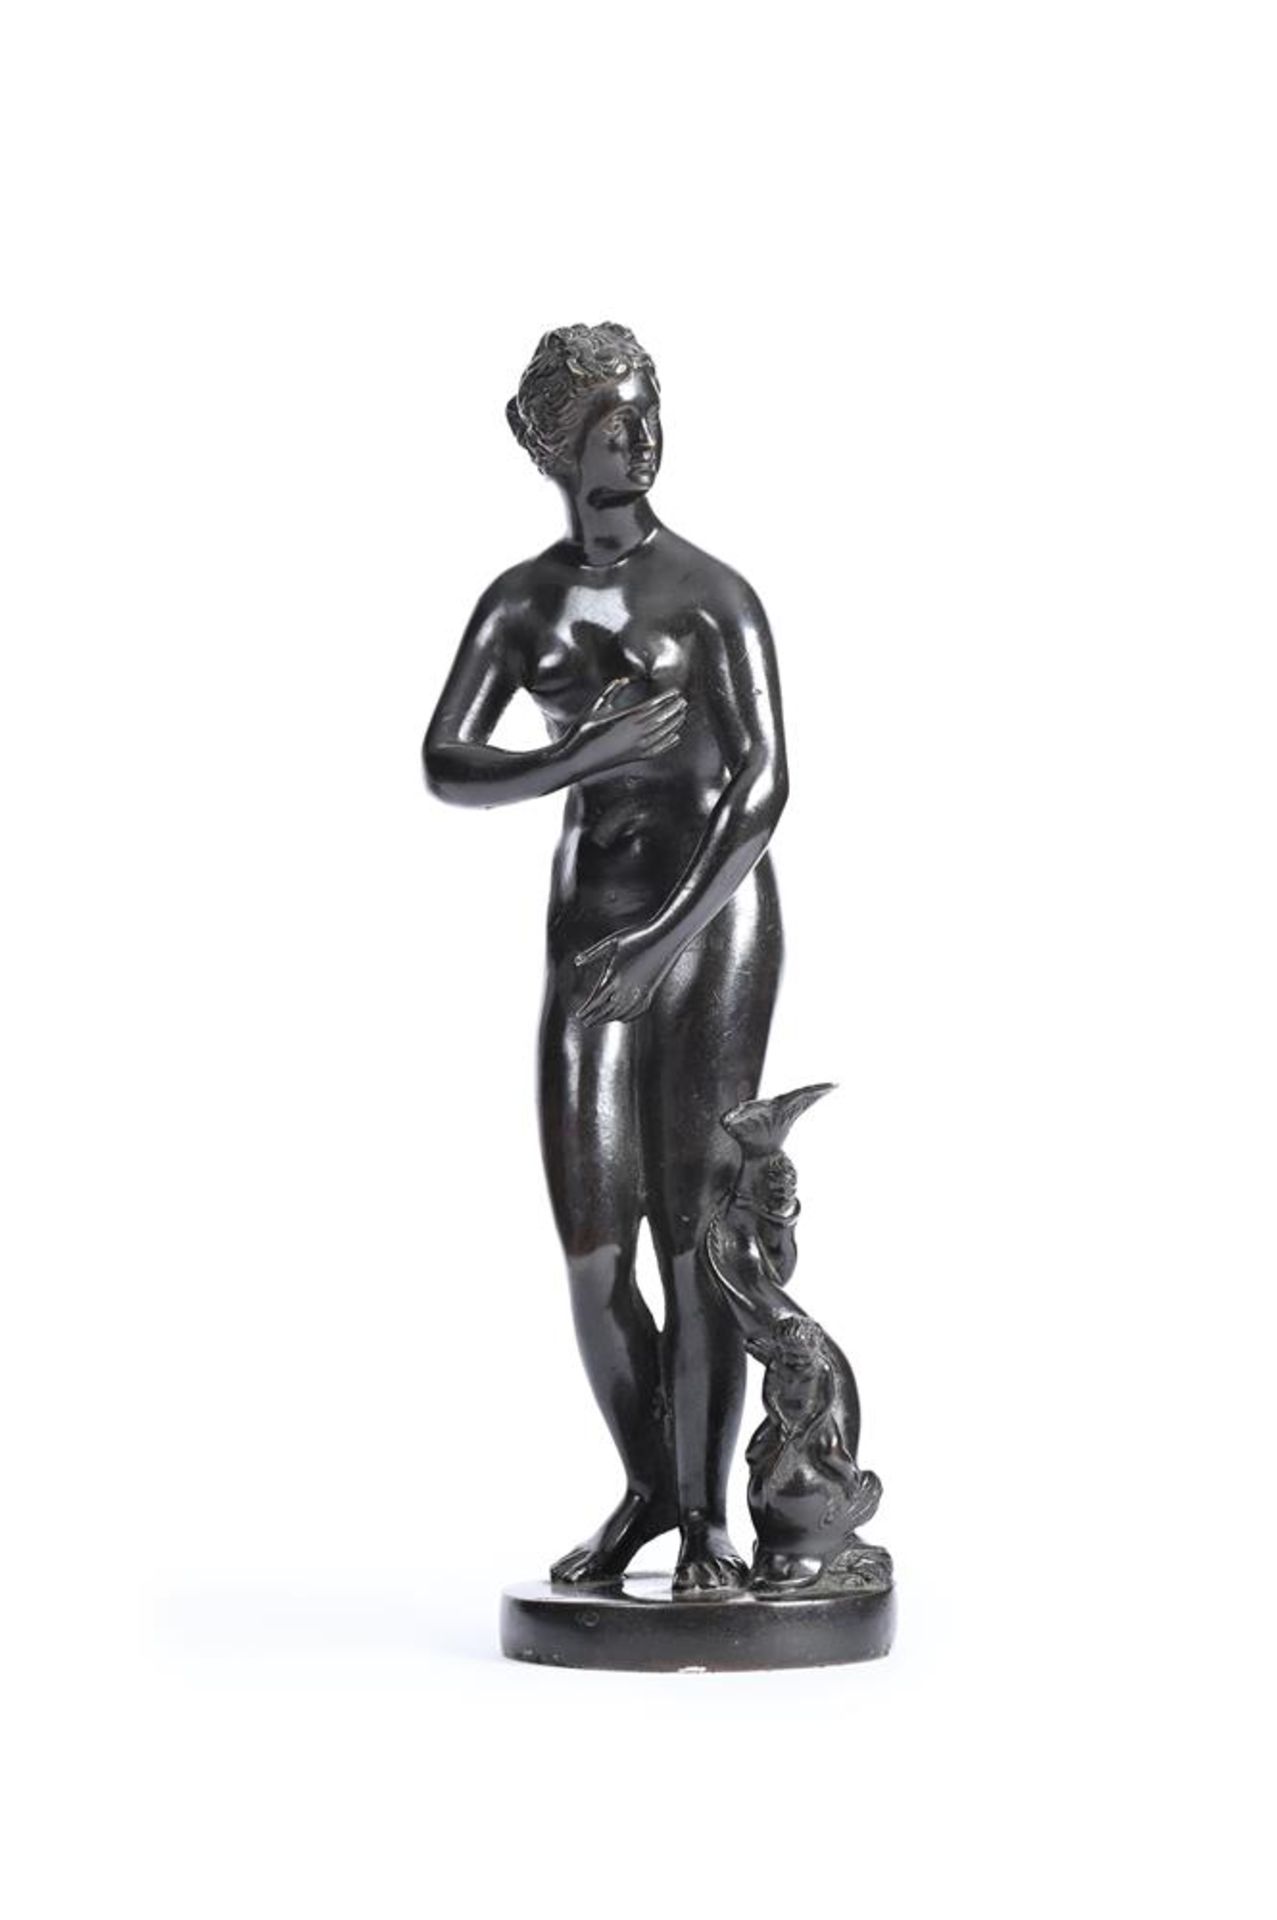 AN ITALIAN BRONZE FIGURE OF THE MEDICI VENUS, LATE 18TH OR EARLY 19TH CENTURY